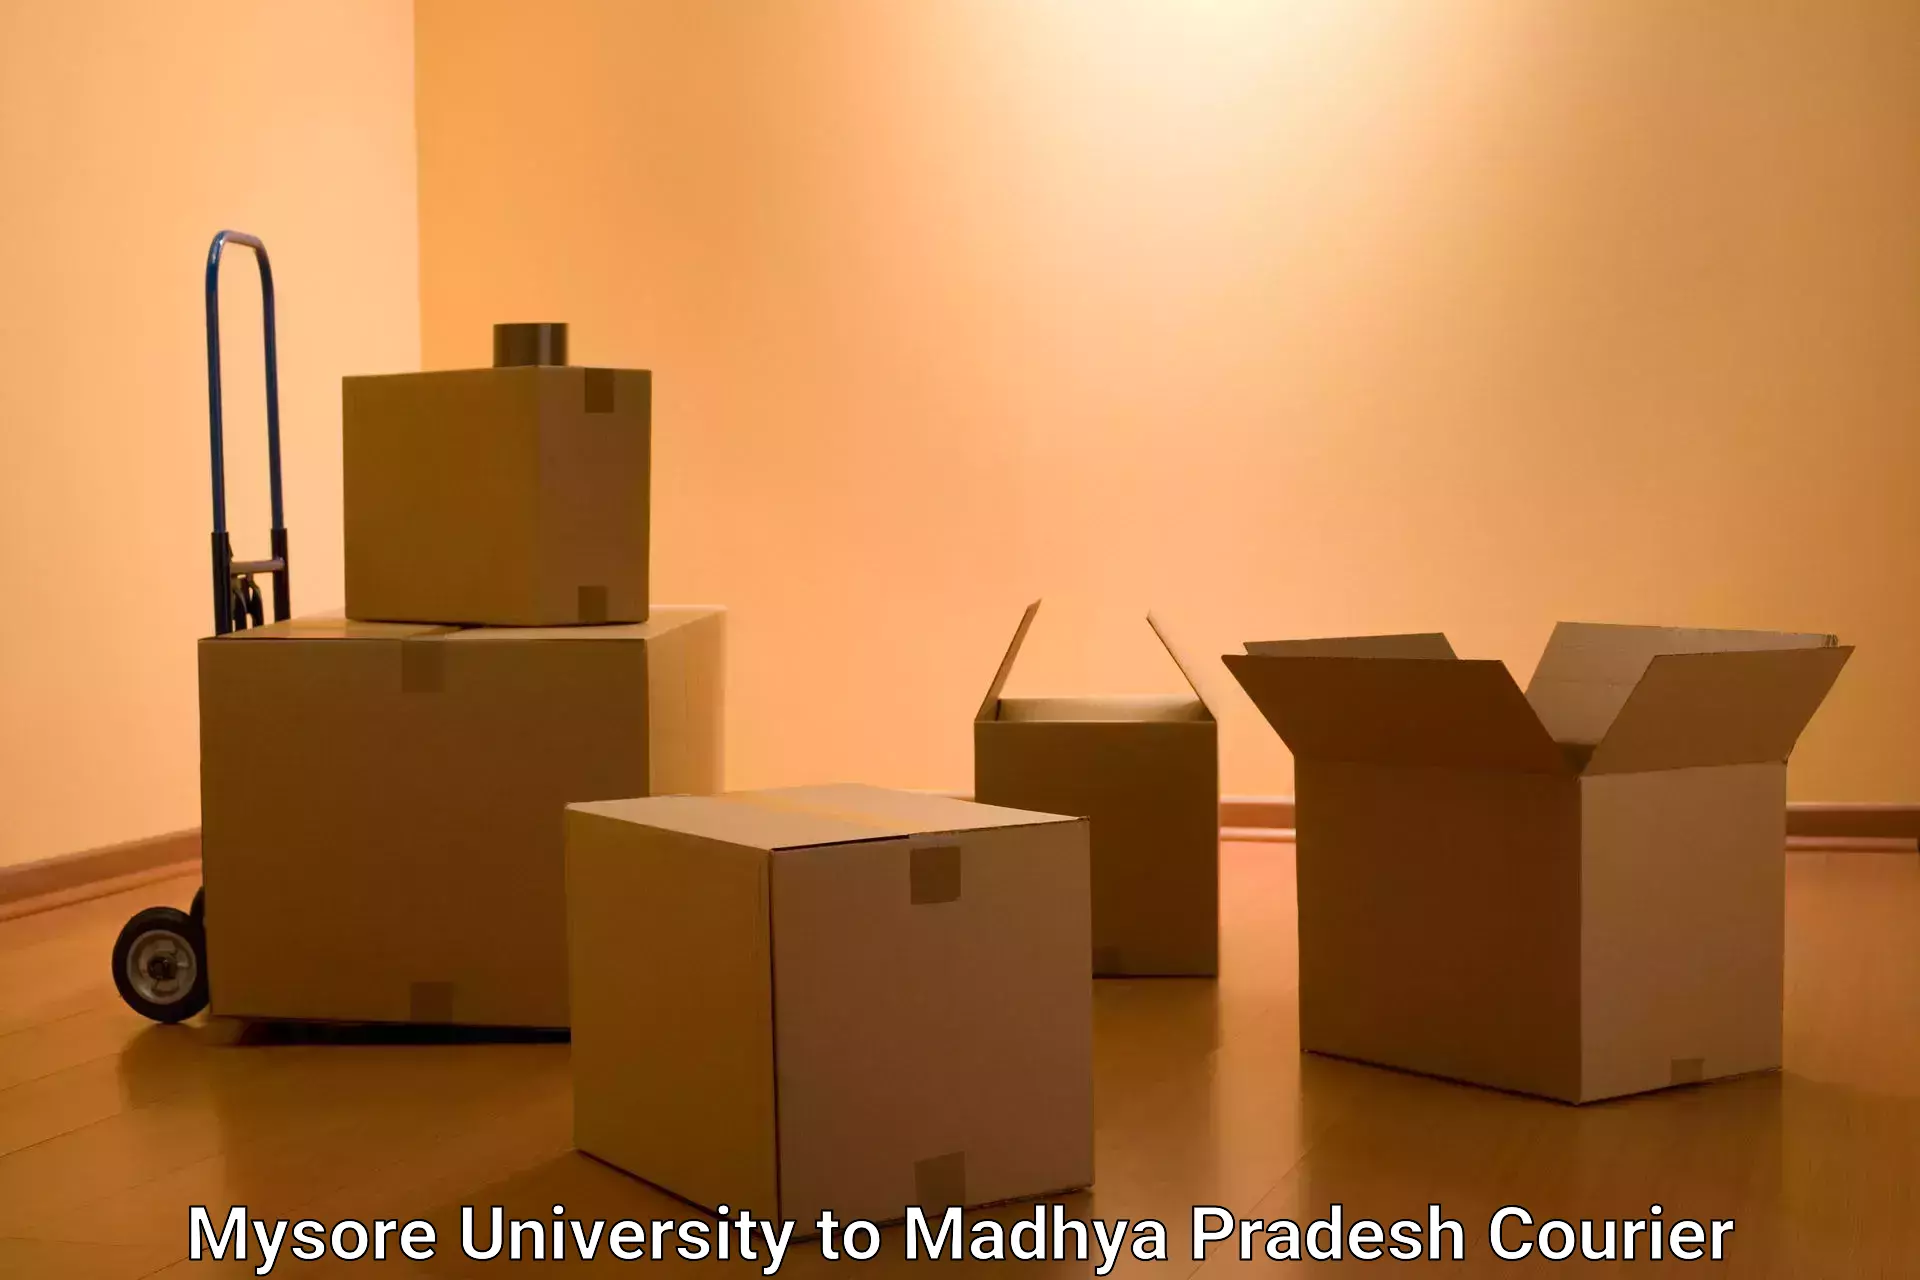 Custom courier packages Mysore University to Hatta